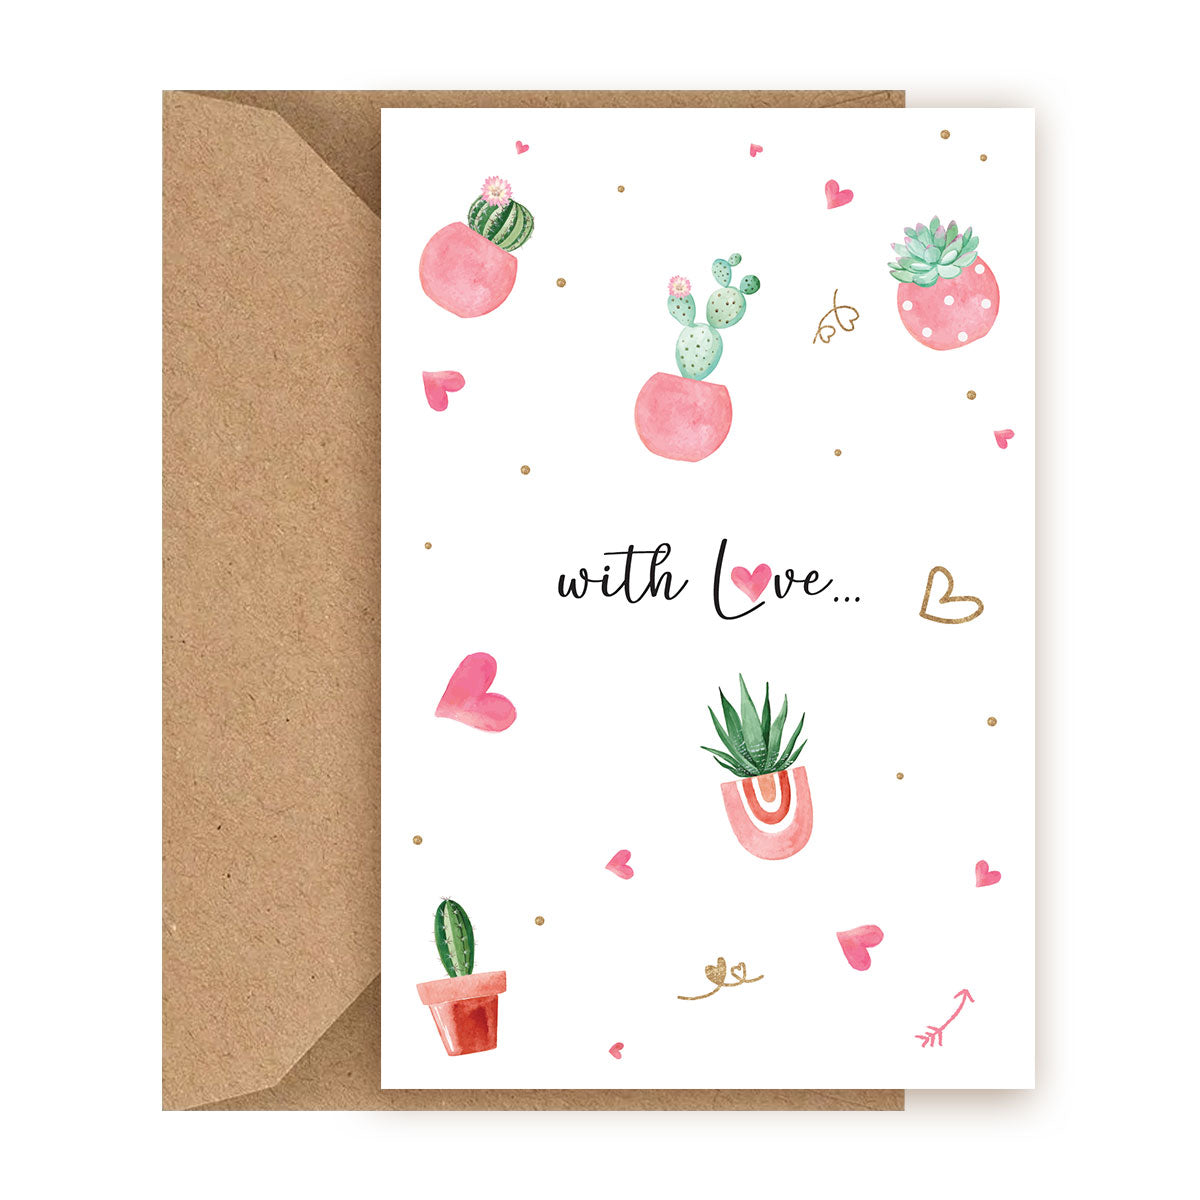 Succulent Valentine's Day Card, Valentine Cards, Valentine Card Ideas, Valentine's Greeting Card, Valentine's Day Cards Perfect for Your Sweetheart, Valentine's Day Cards for Sale, Succulent Love Card, Lovely Succulent Themed Valentine's Day Card, Succulent Gifts for Valentine's Day, Succulent Plant Gift Ideas For Valentine's Day, Best Valentine Gifts 2023, Unique DIY Valentine's Day Gifts For That Special Someone